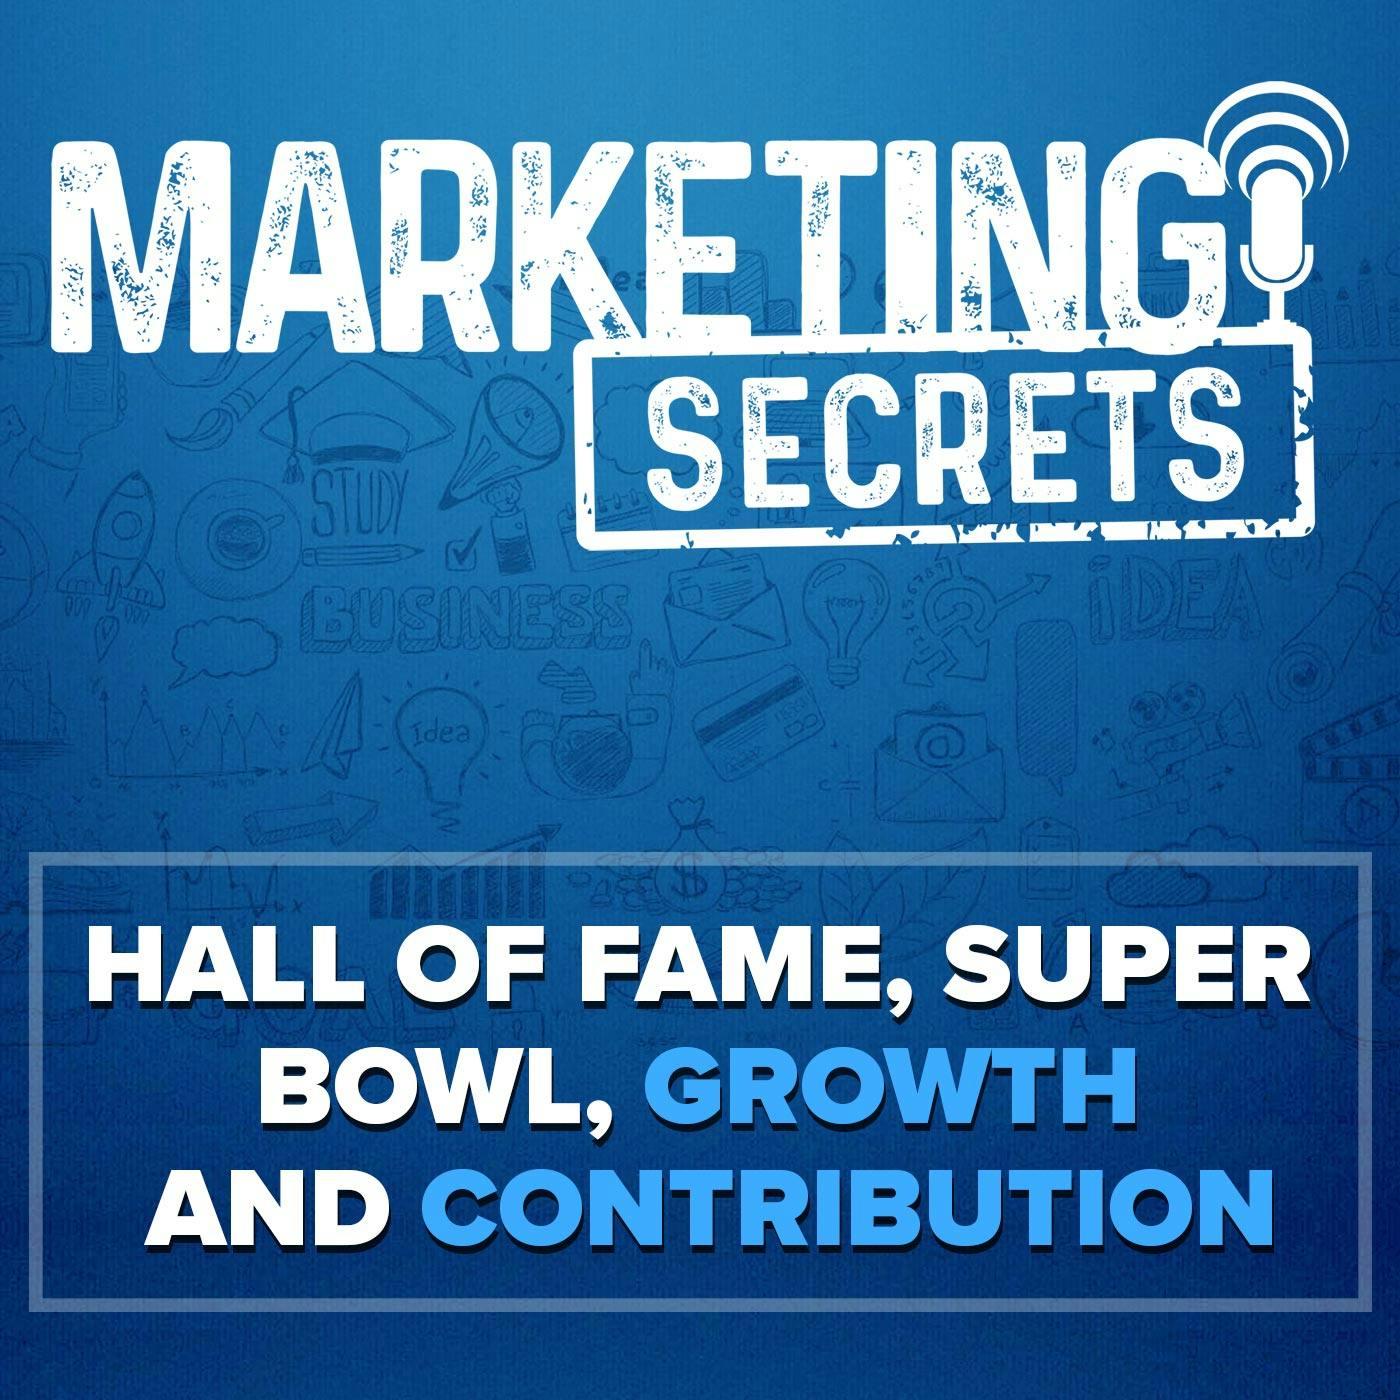 Hall of Fame, Super Bowl, Growth and Contribution